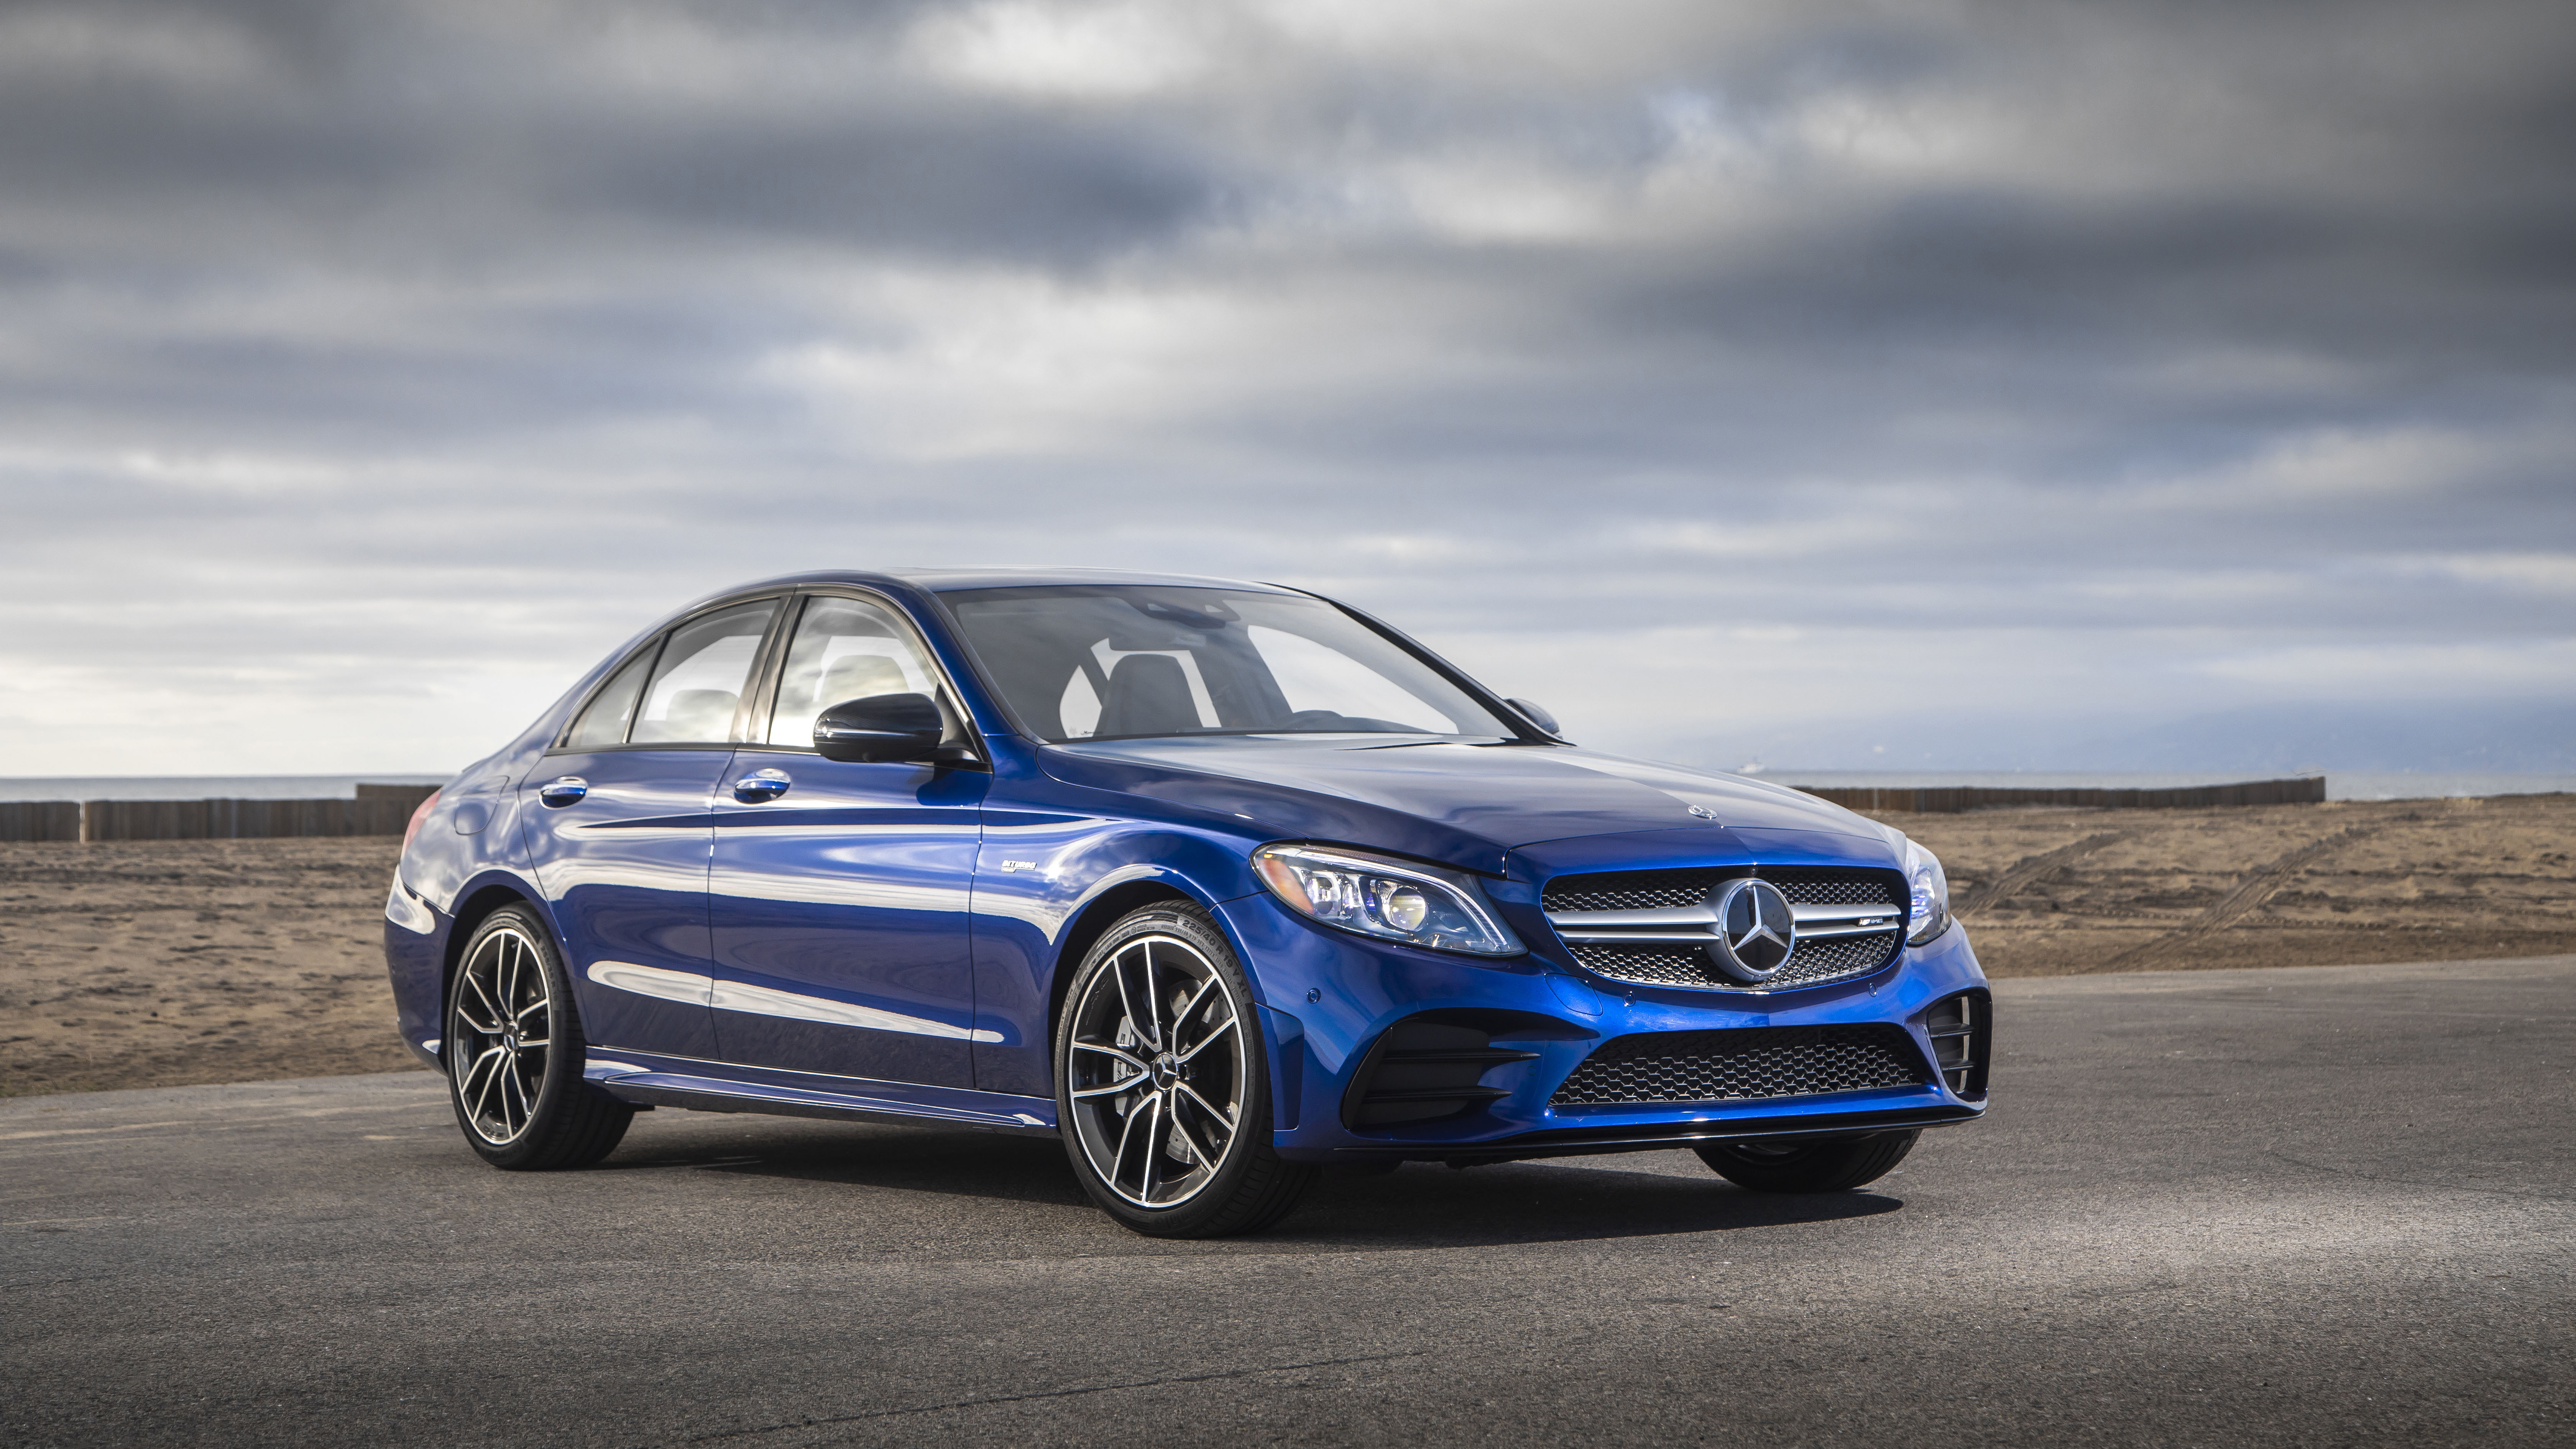 2021 Mercedes Benz C Class Reviews Prices specs features and photos 